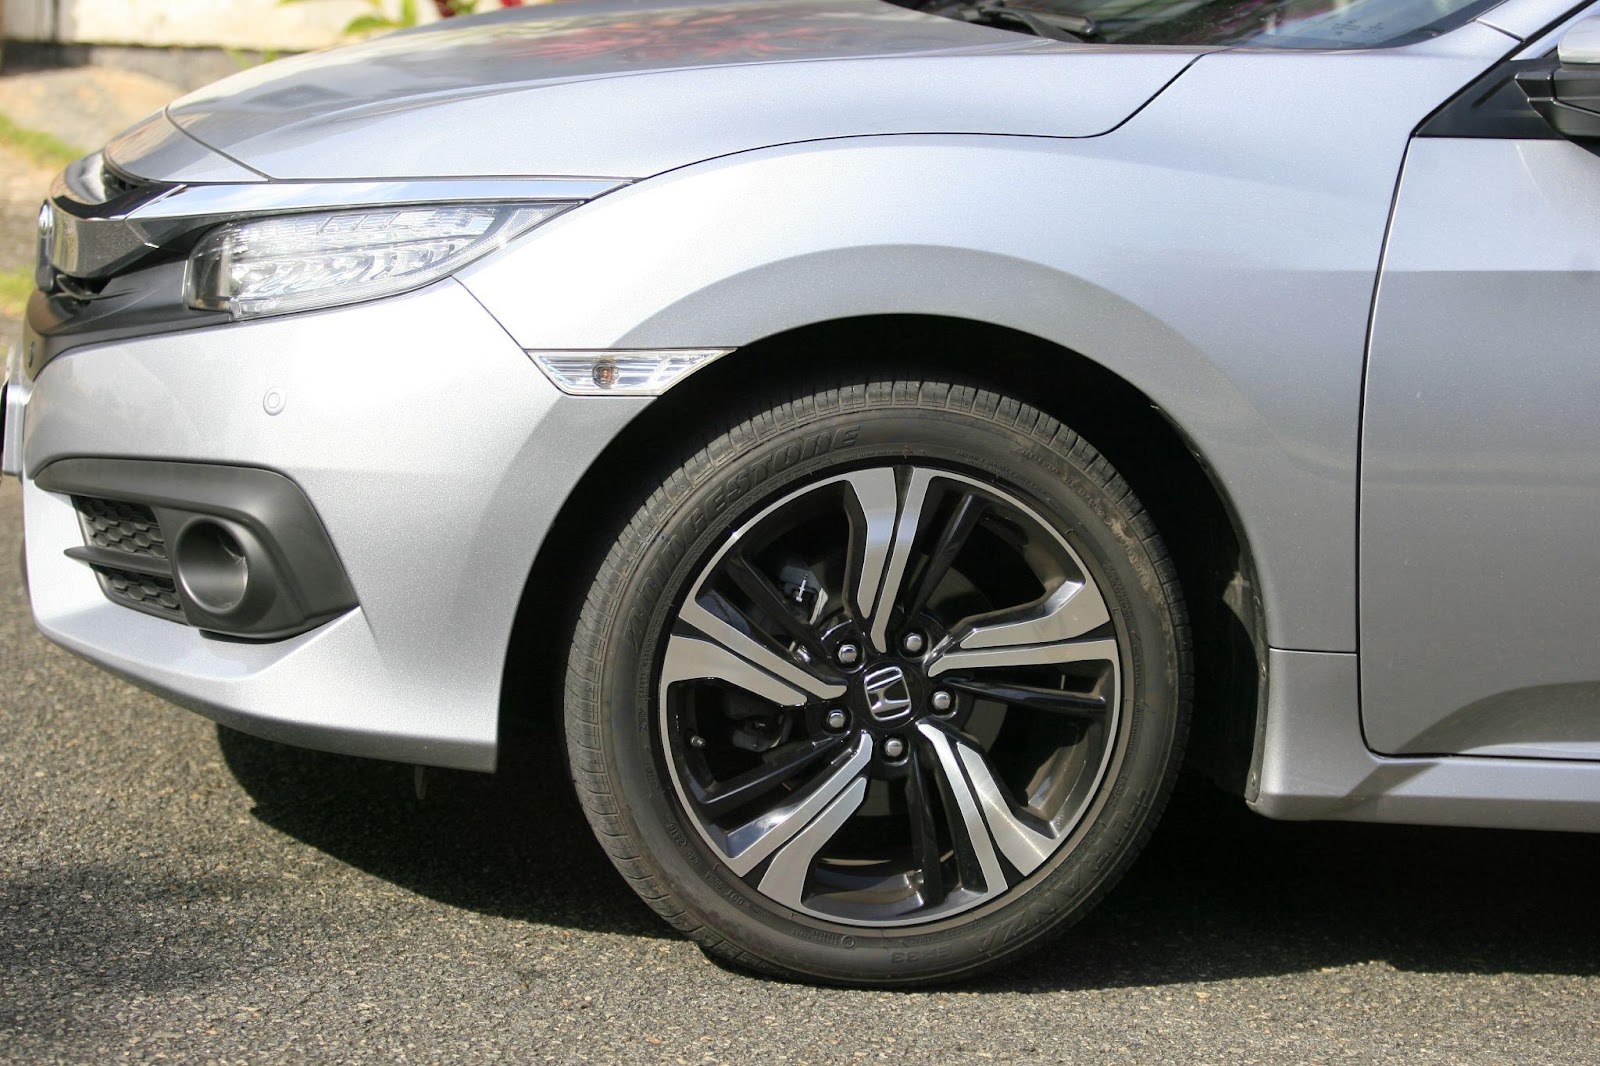 Picture of newer model Honda Civic's front wheel and headlights - drivers side